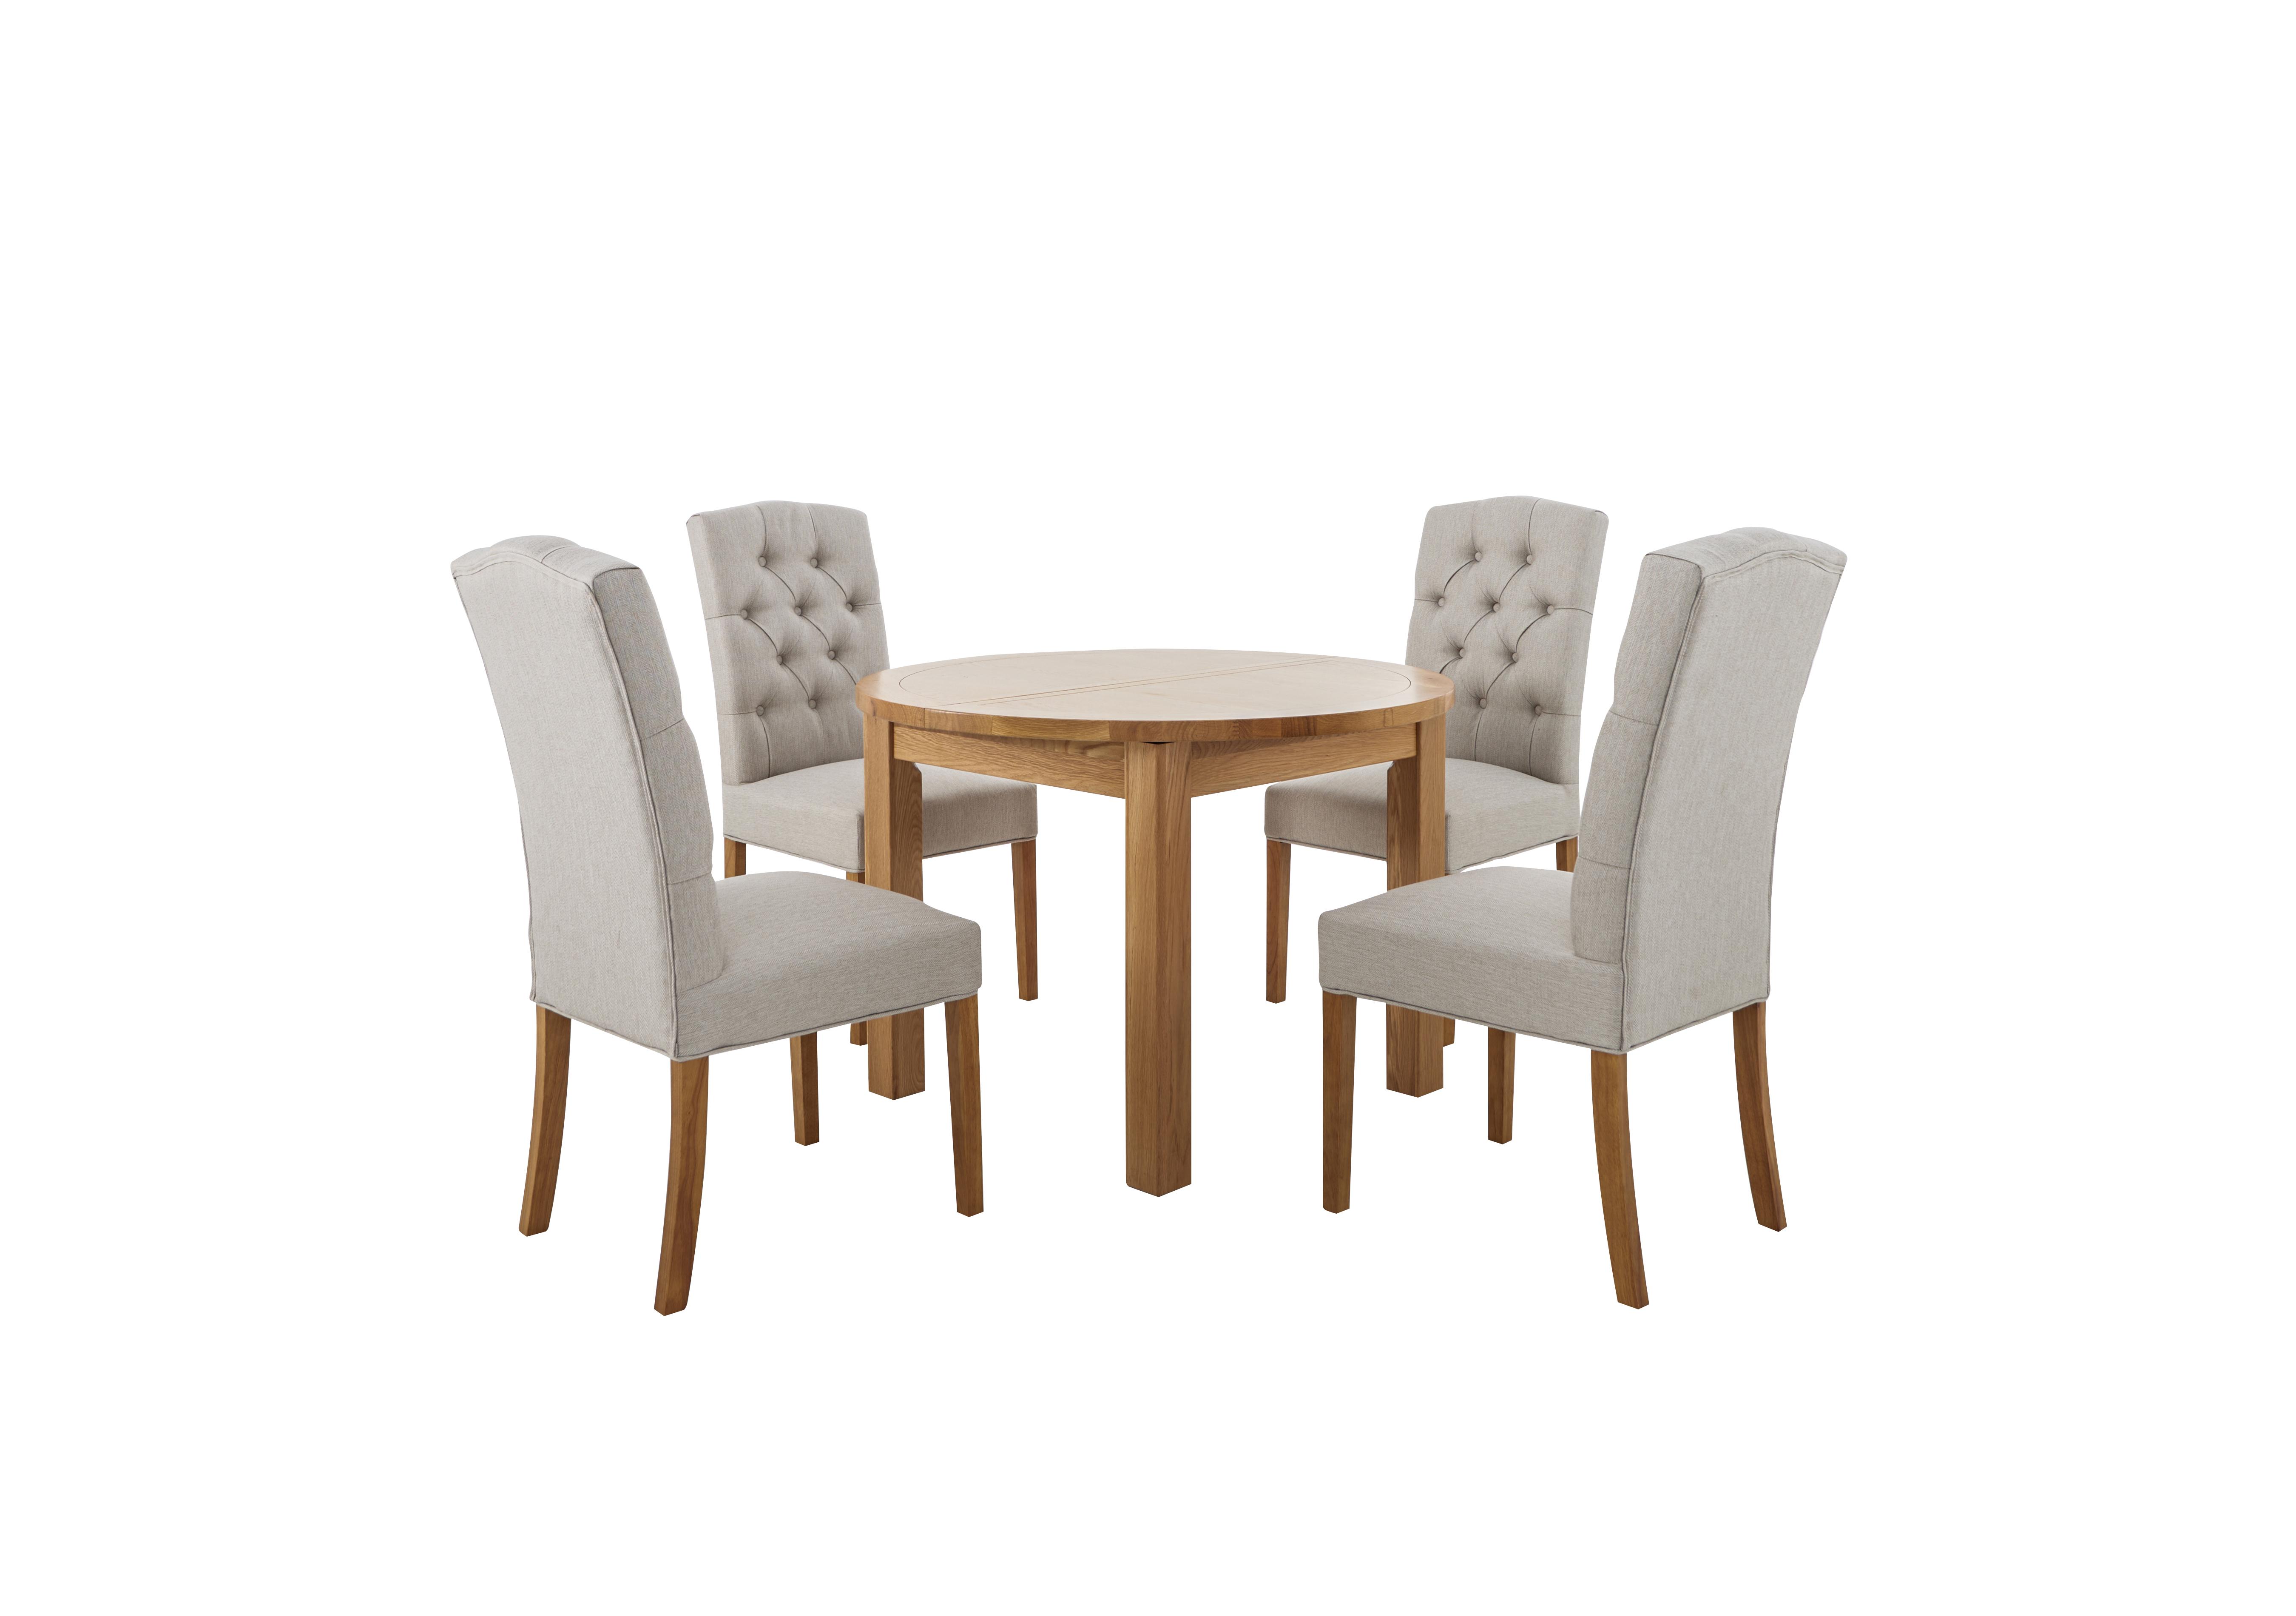 California Solid Oak Round Extending Table and 4 Button Back Upholstered Chairs in  on Furniture Village